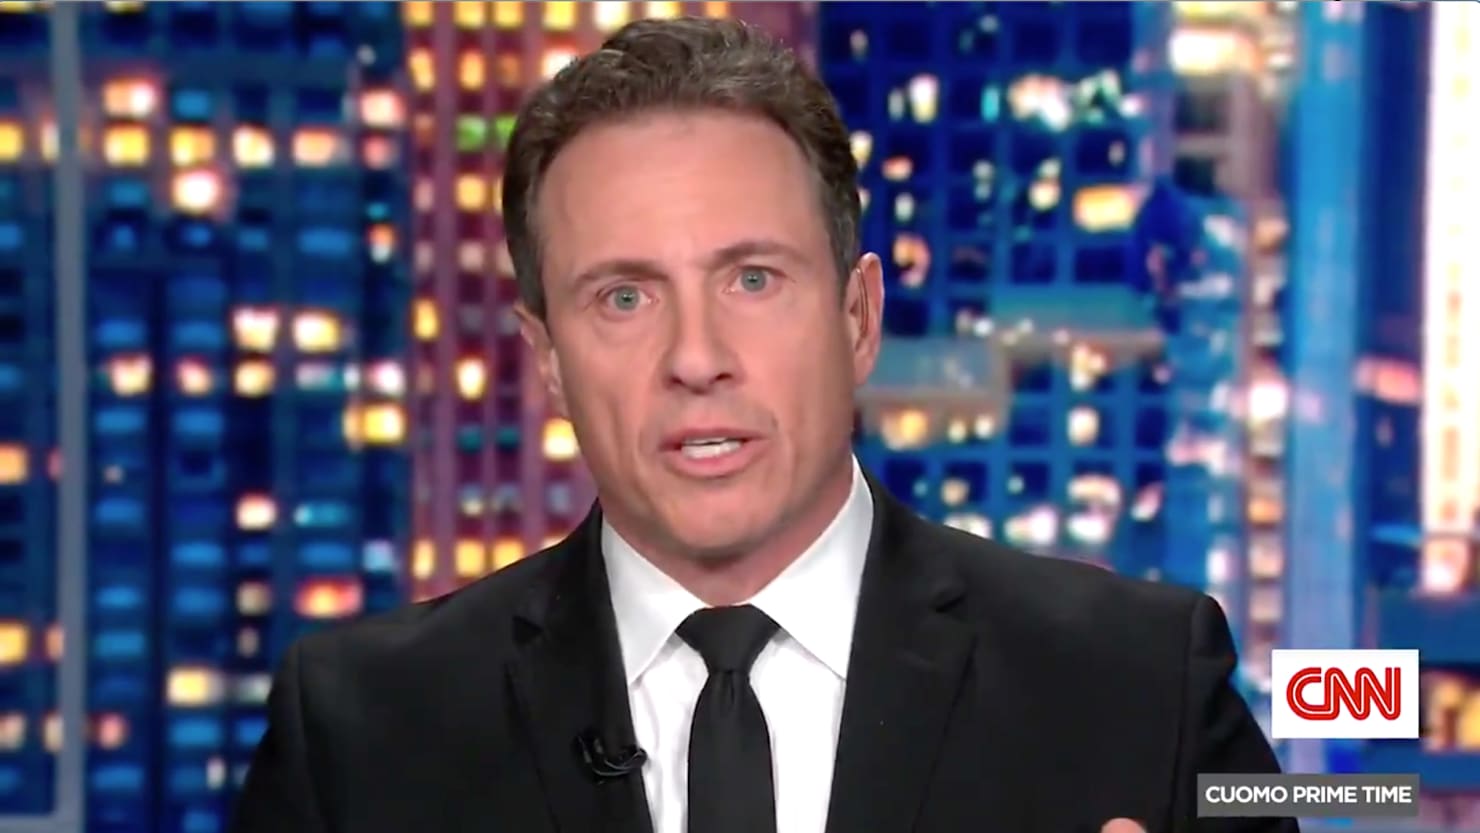 CNN’s Chris Cuomo clumsily acknowledges the allegations against Brother Andrew Cuomo